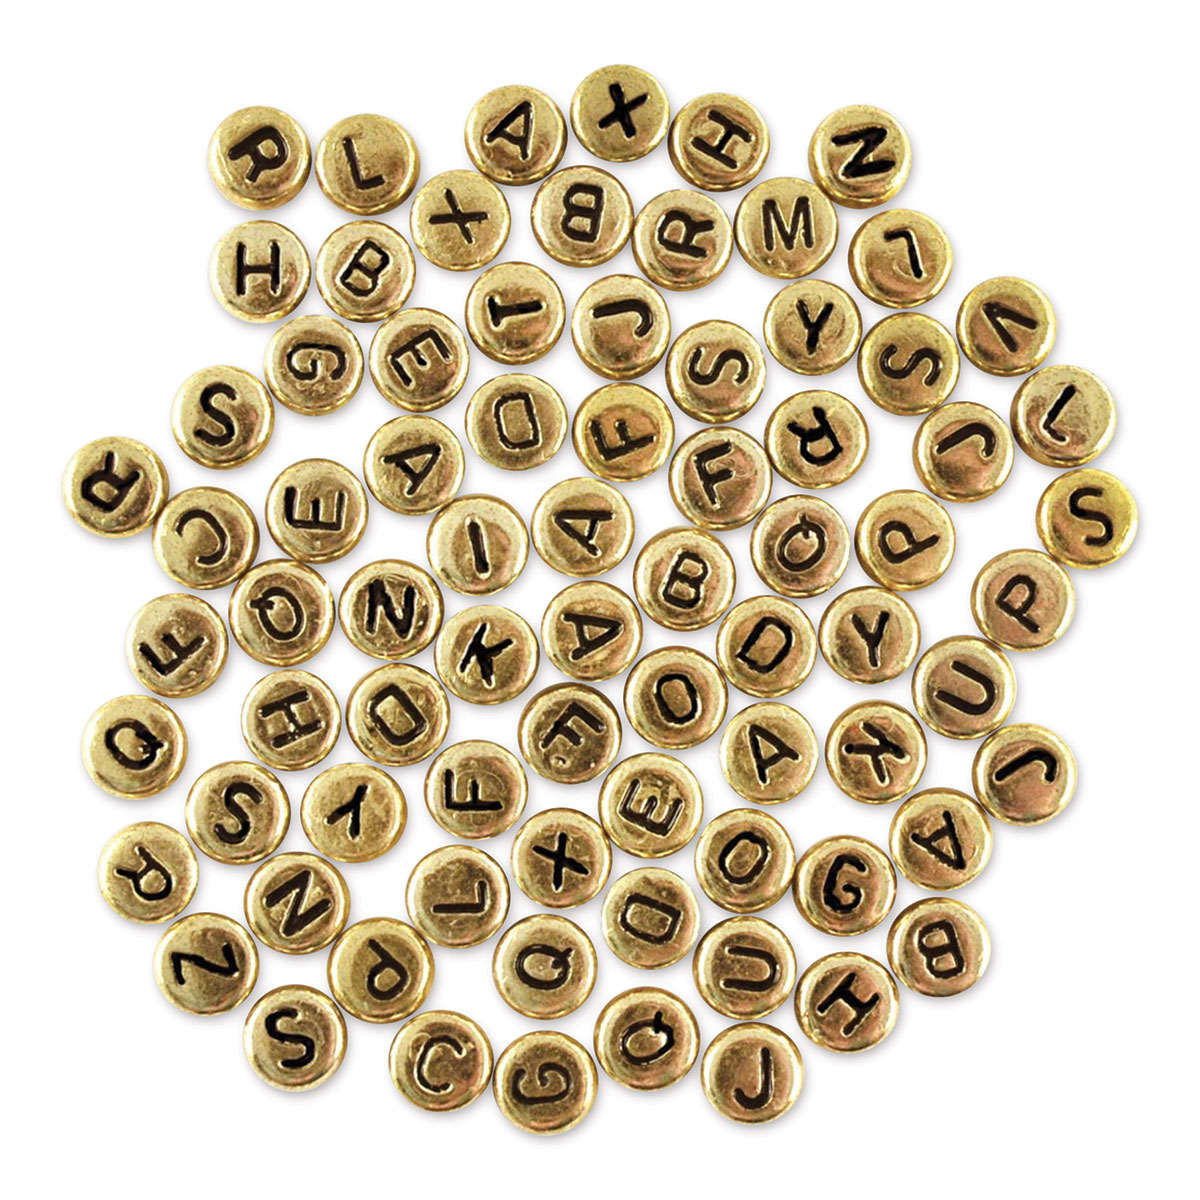 Craft Medley Alphabet Beads - White with Black Letters, Package of